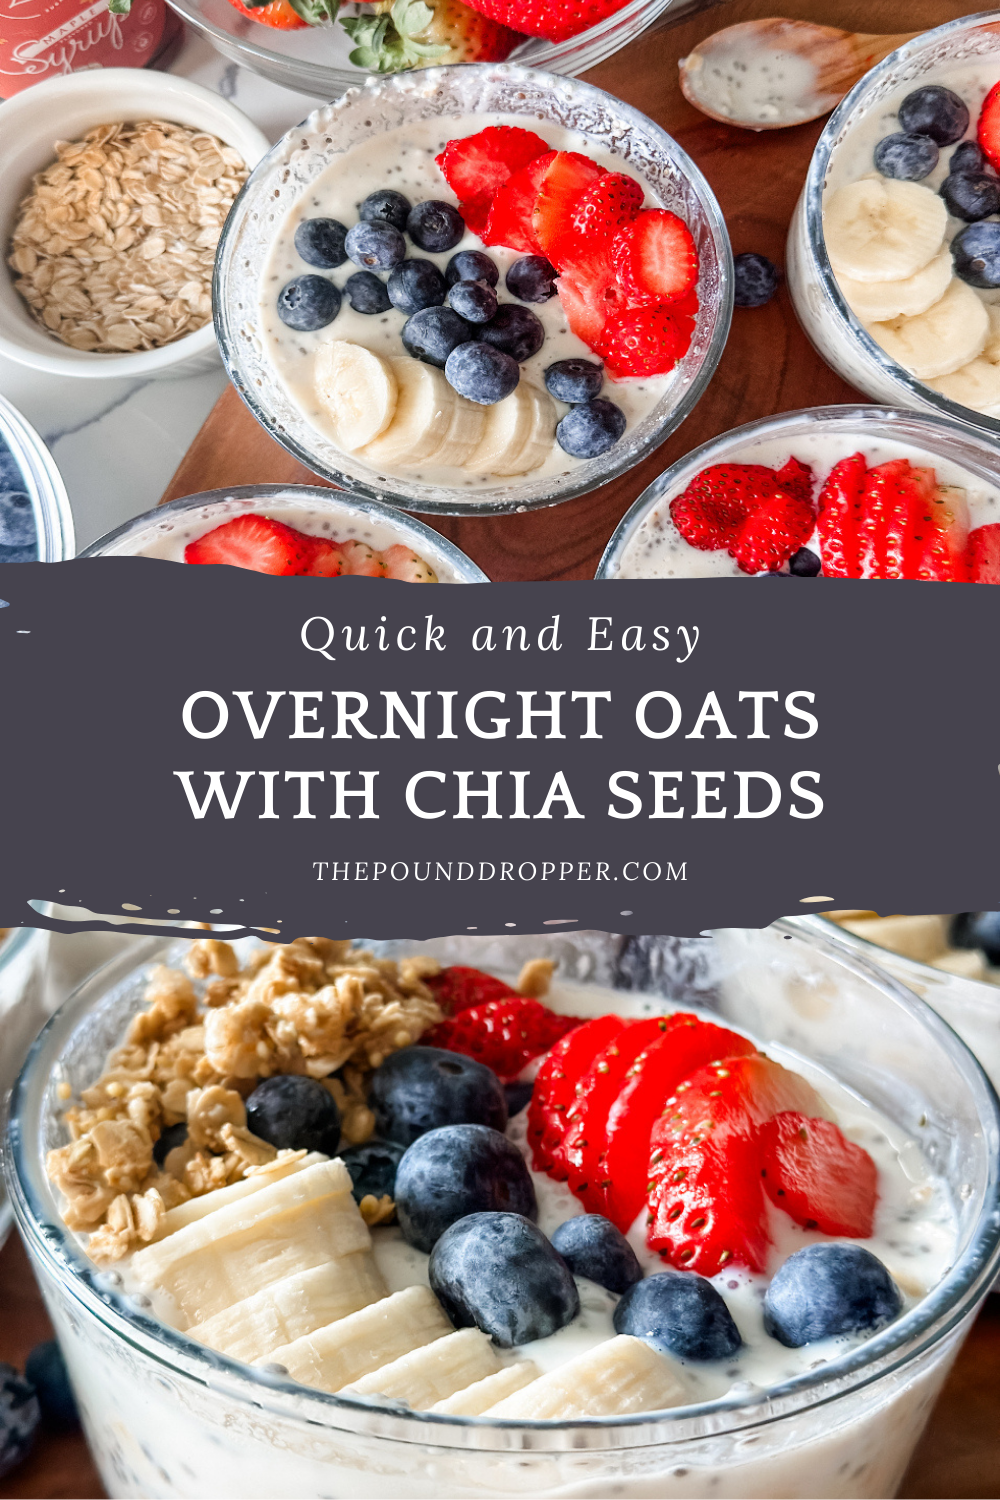 Quick and Easy Overnight Oats with Chia Seeds - Pound Dropper